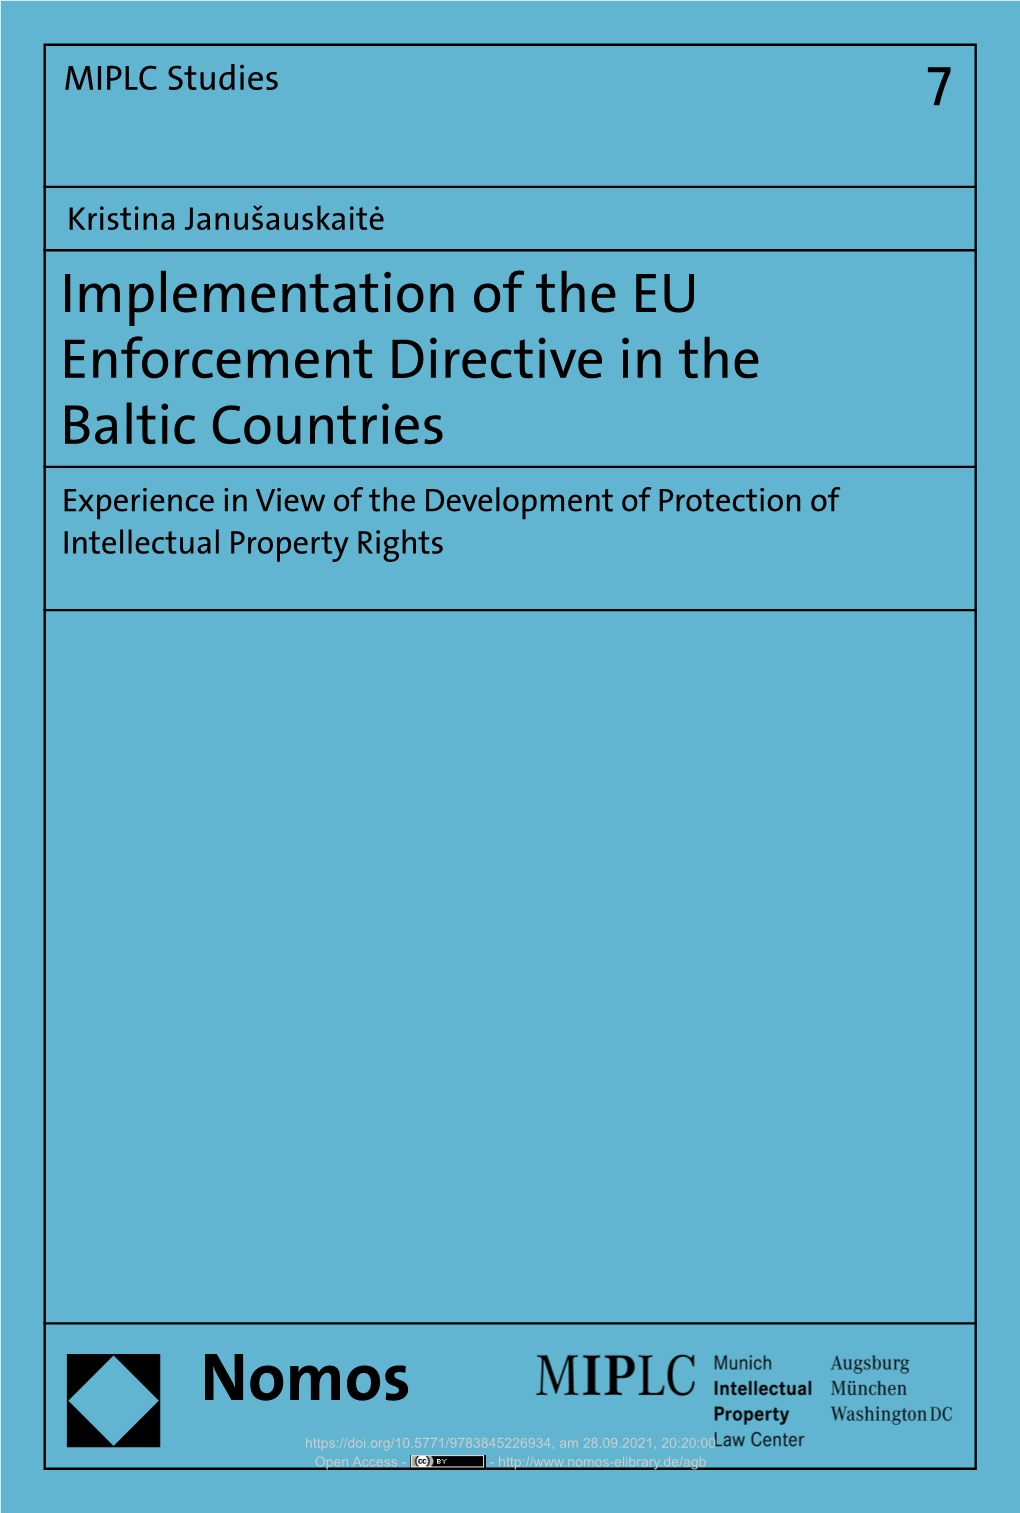 Implementation of the EU Enforcement Directive in the Baltic Countries 7